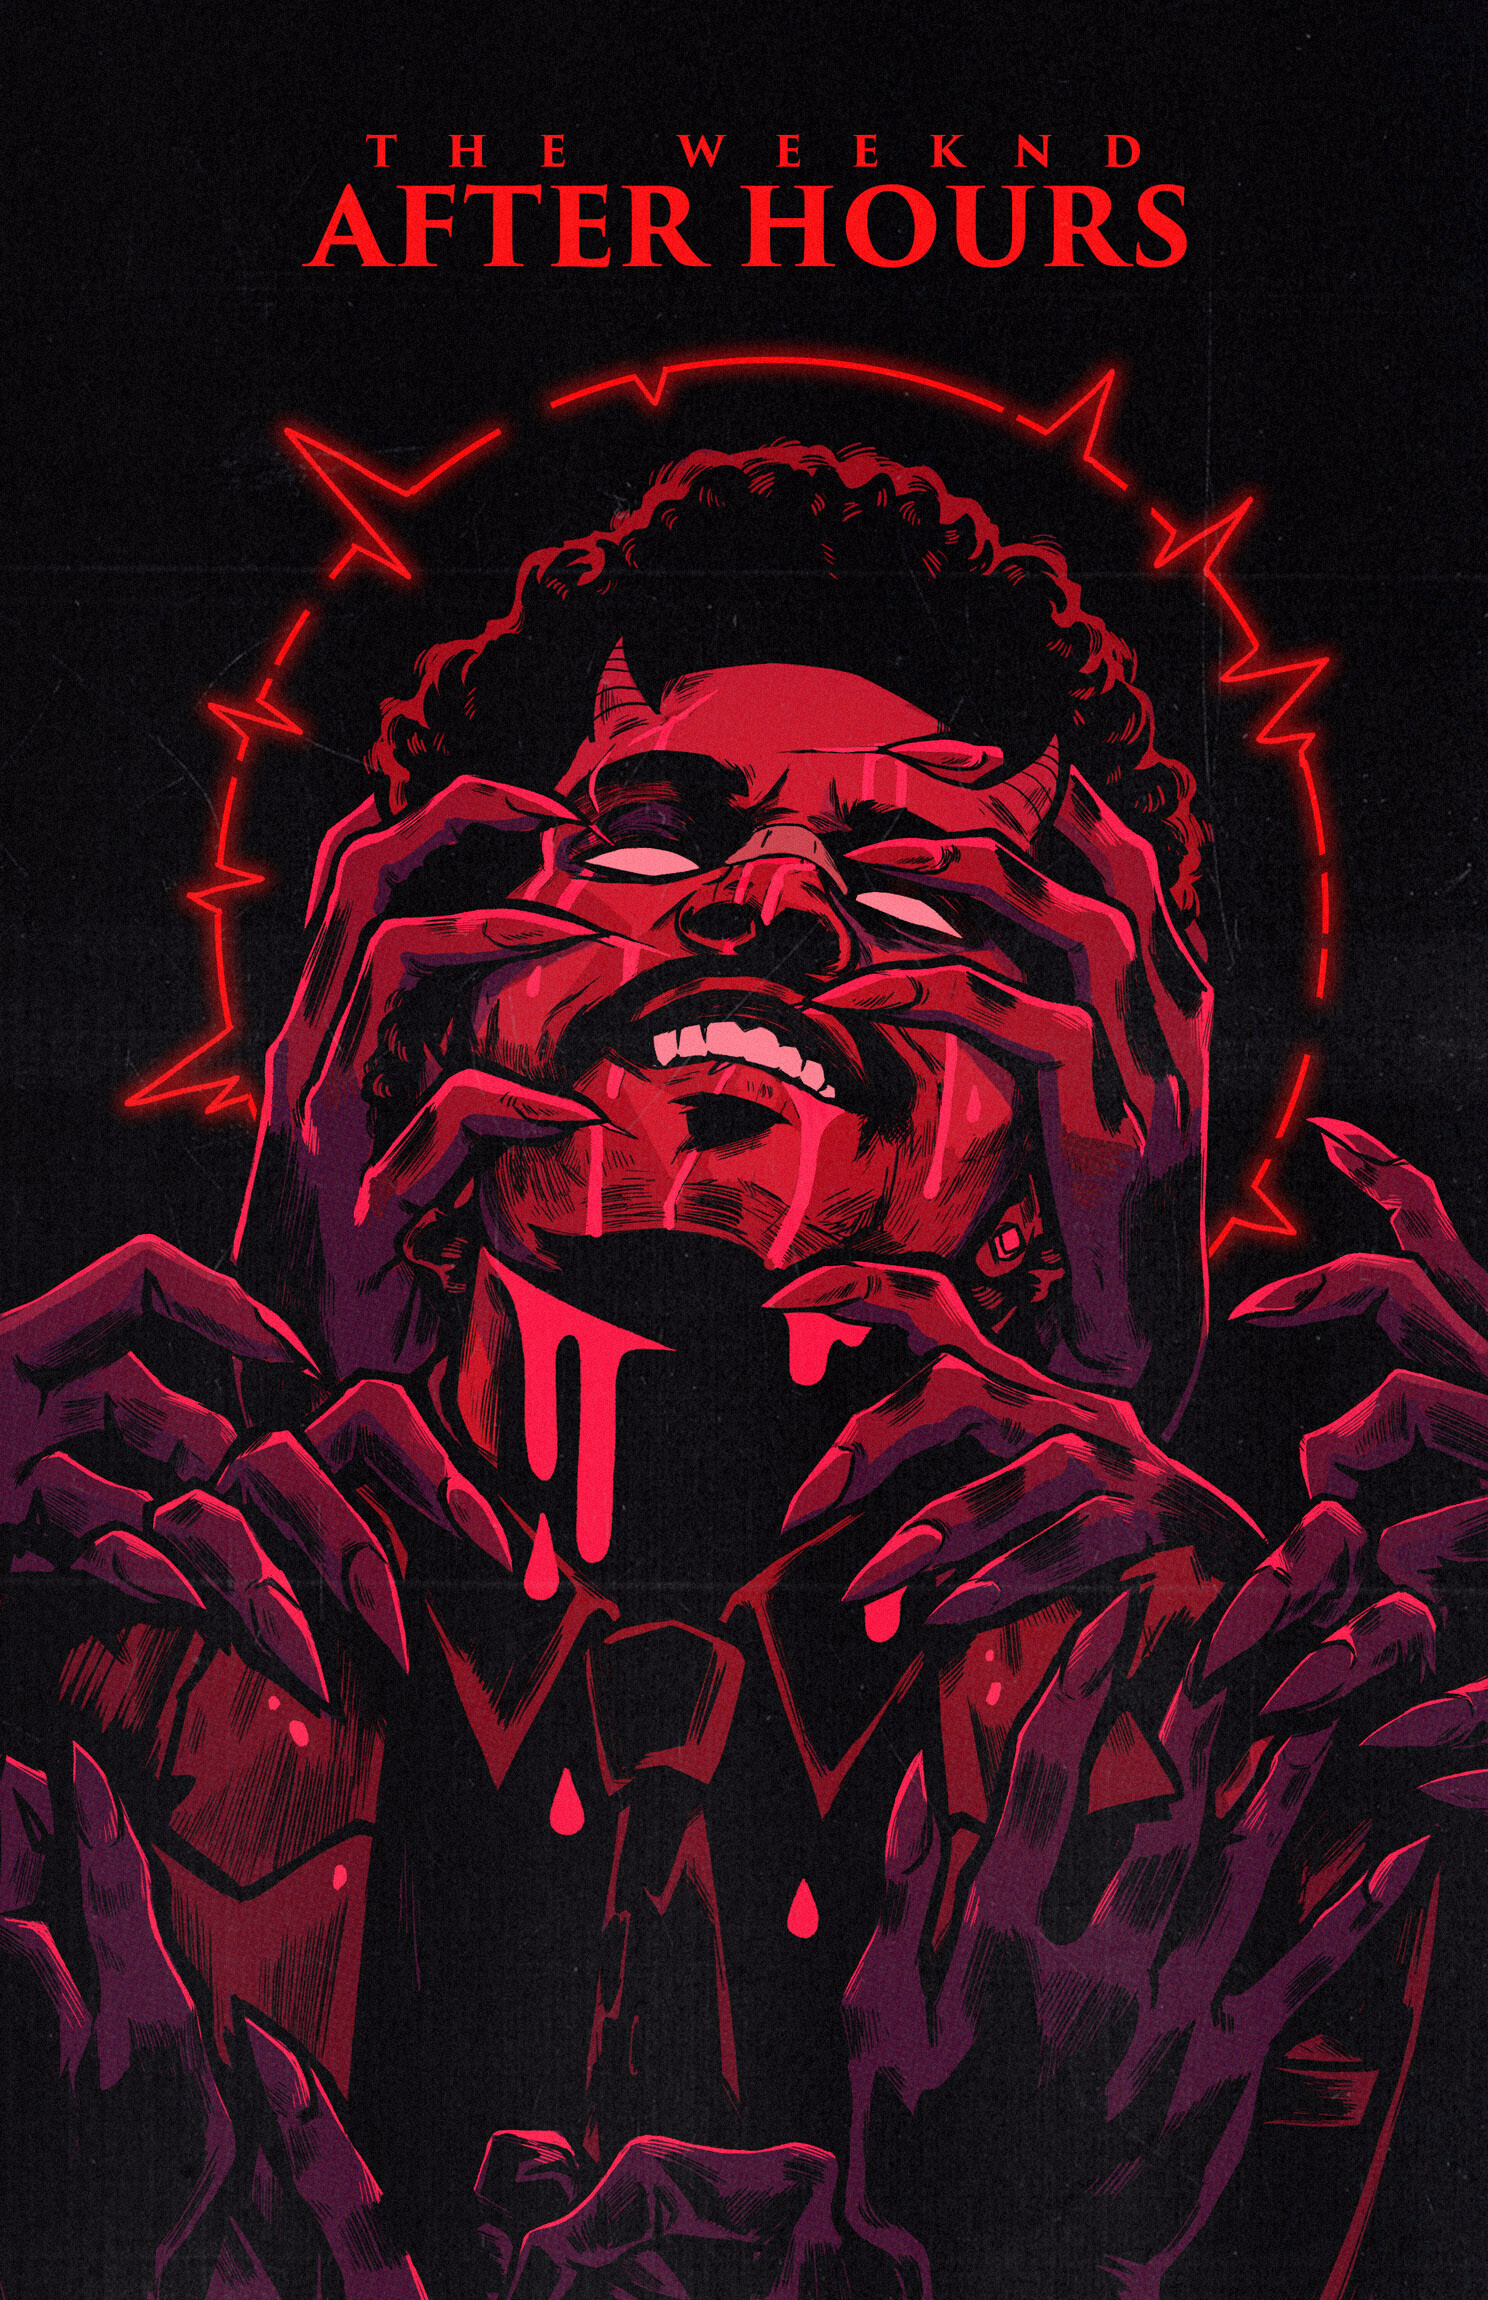 ArtStation - The Weeknd: Digitally Painted AFTER HOURS Poster